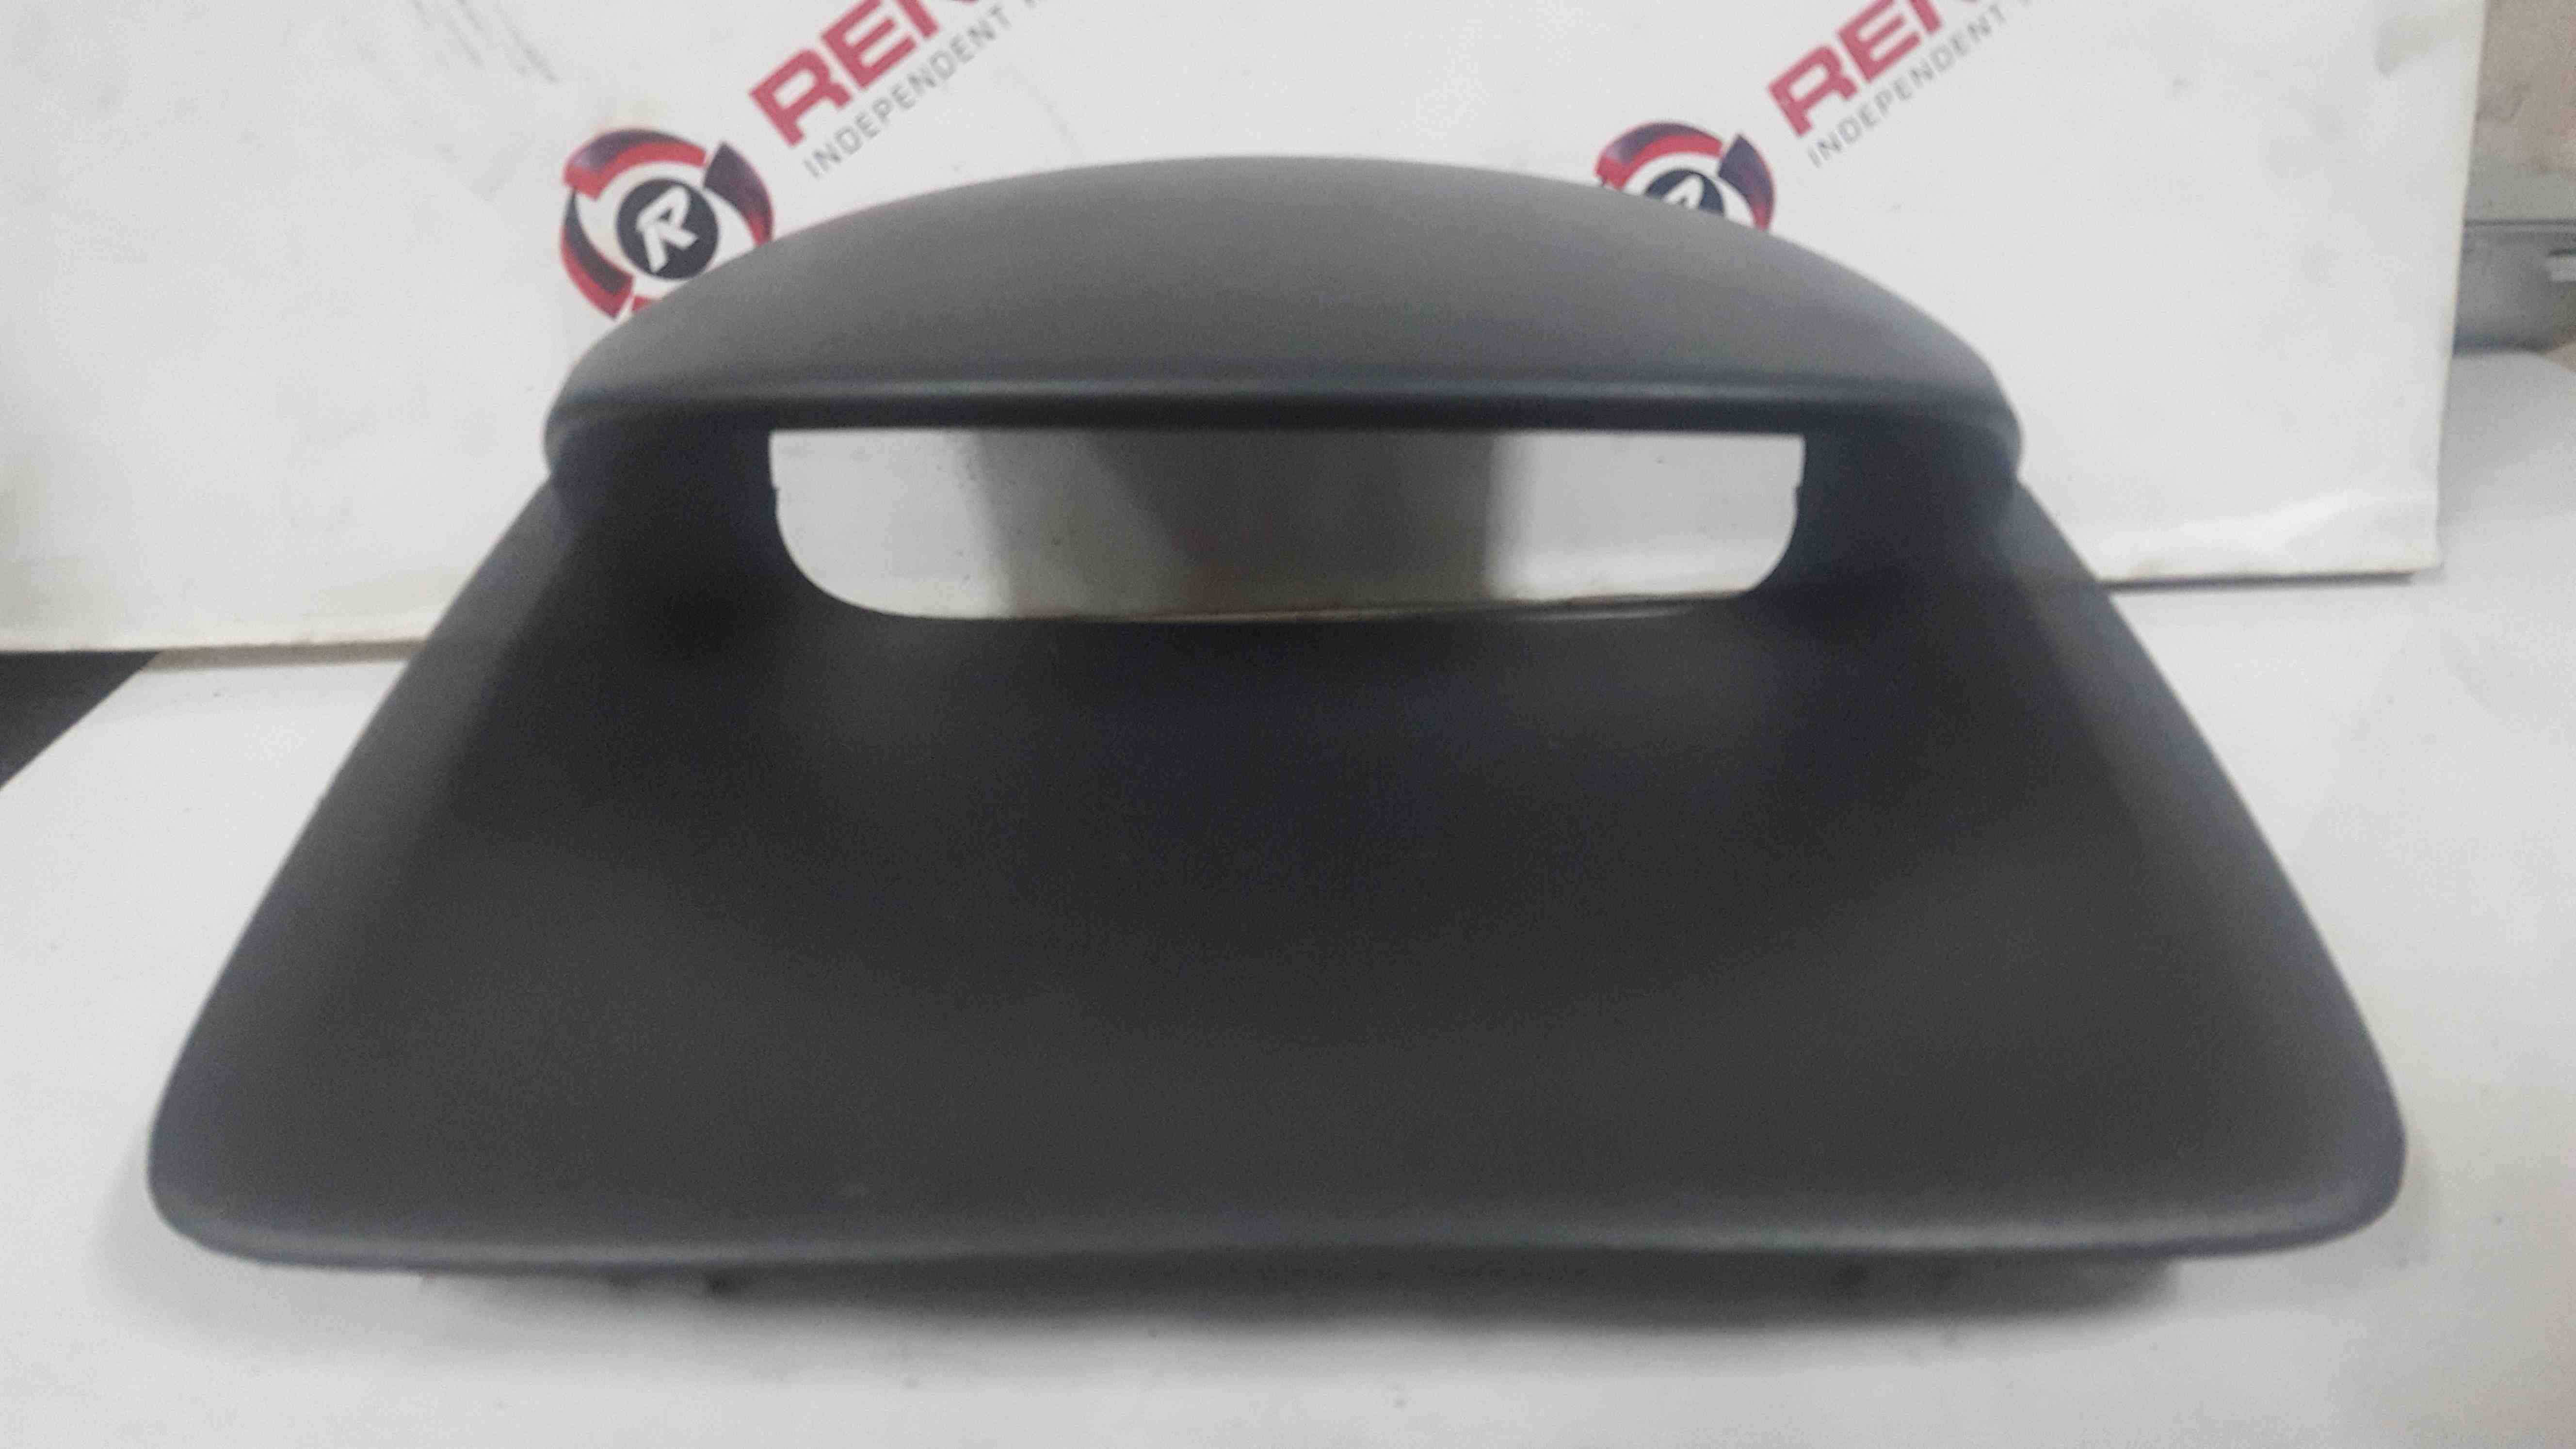 Renault Clio MK3 2005-2009 Centre Display Hood Cover 8200475700